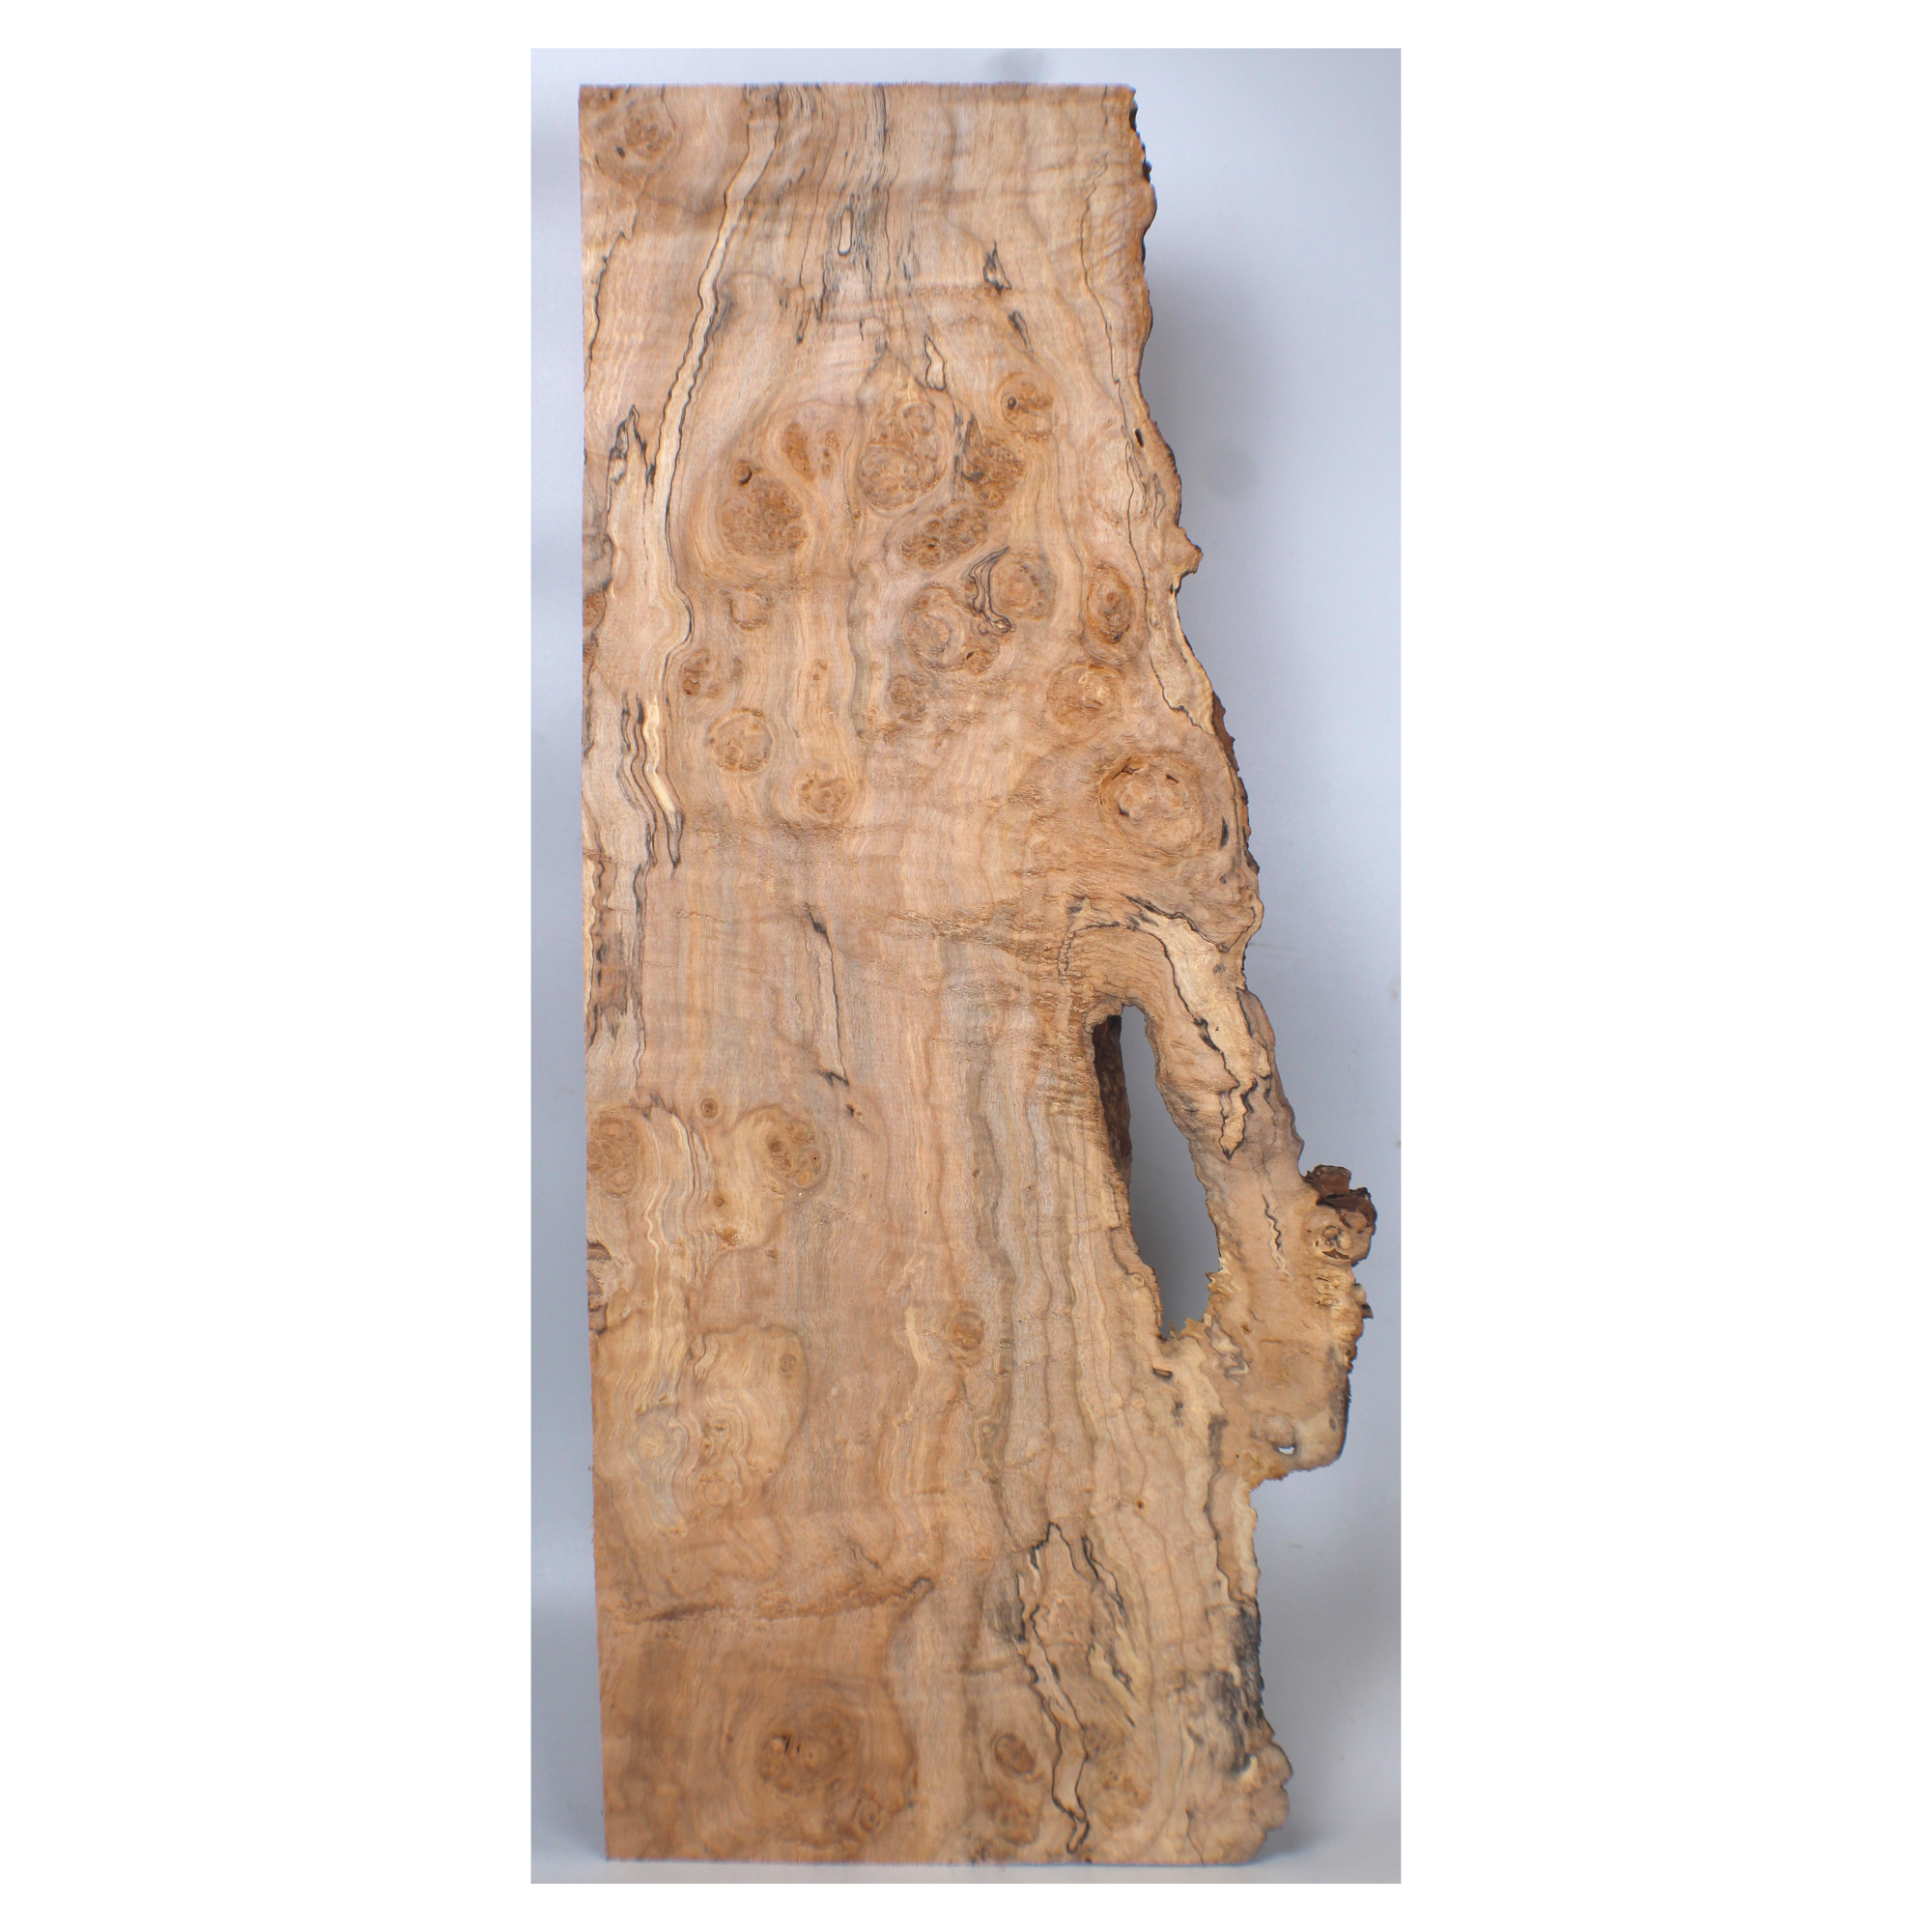 Unique maple burl craft board with large burl eyes, beautiful color variation, spalting, and live edge.